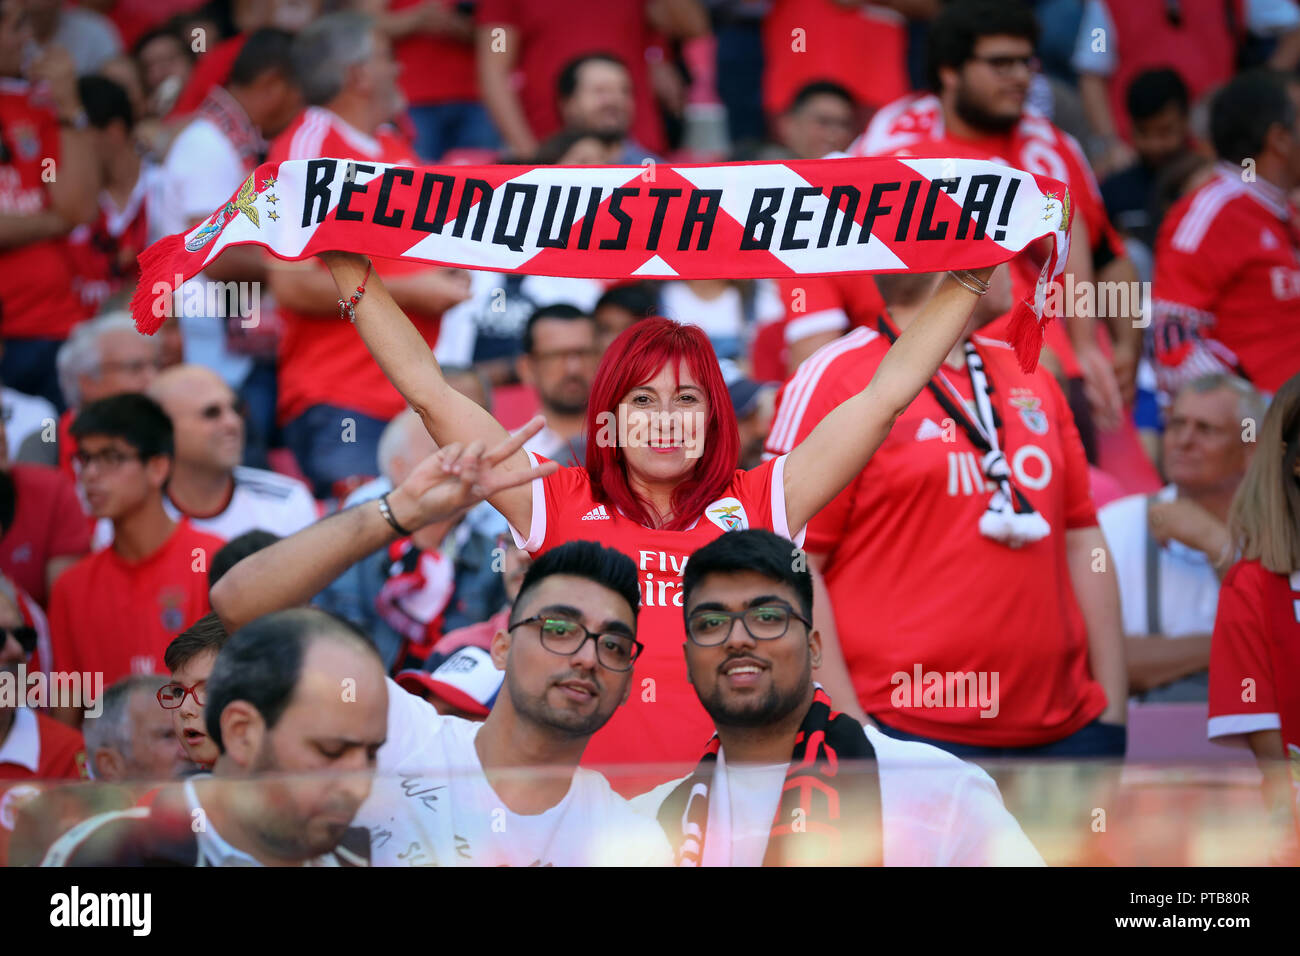 SL Benfica supporters seen in action during the League NOS 2018/19 football match between SL Benfica vs FC Porto. (Final score: SL Benfica 1-0 FC Porto). Stock Photo